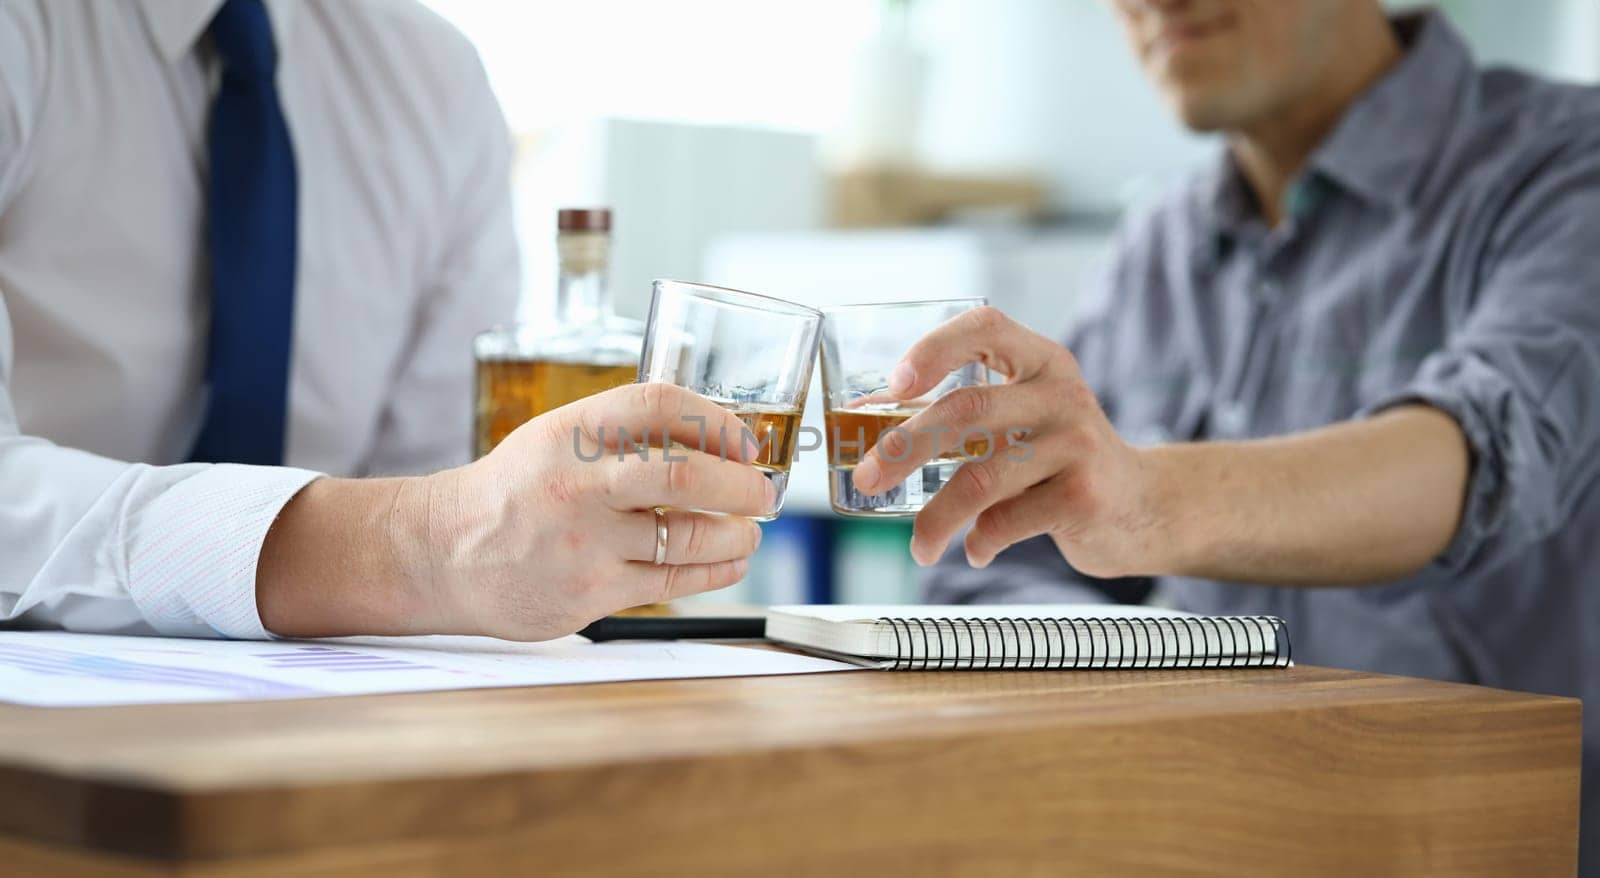 Men in suits drink alcohol in workplace at office by kuprevich